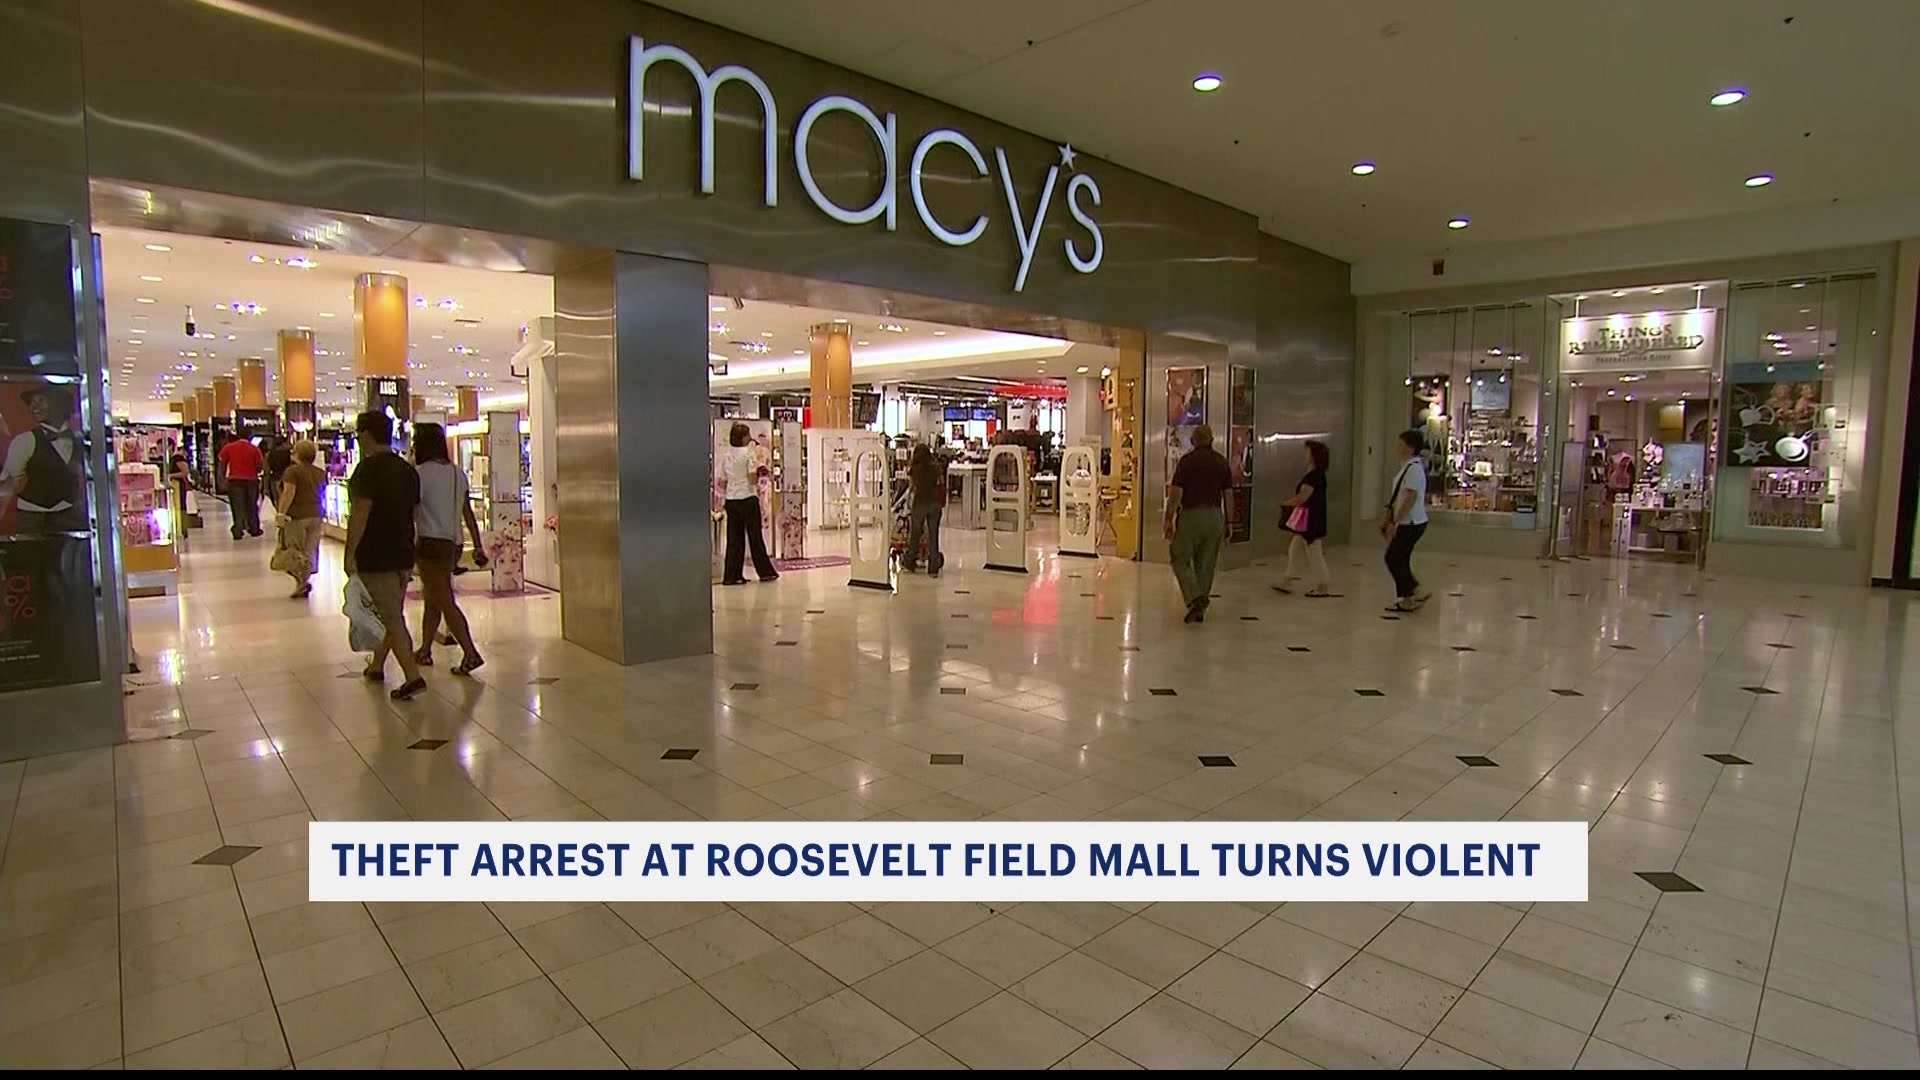 Man Wanted for Stealing Sunglasses from Roosevelt Field Mall